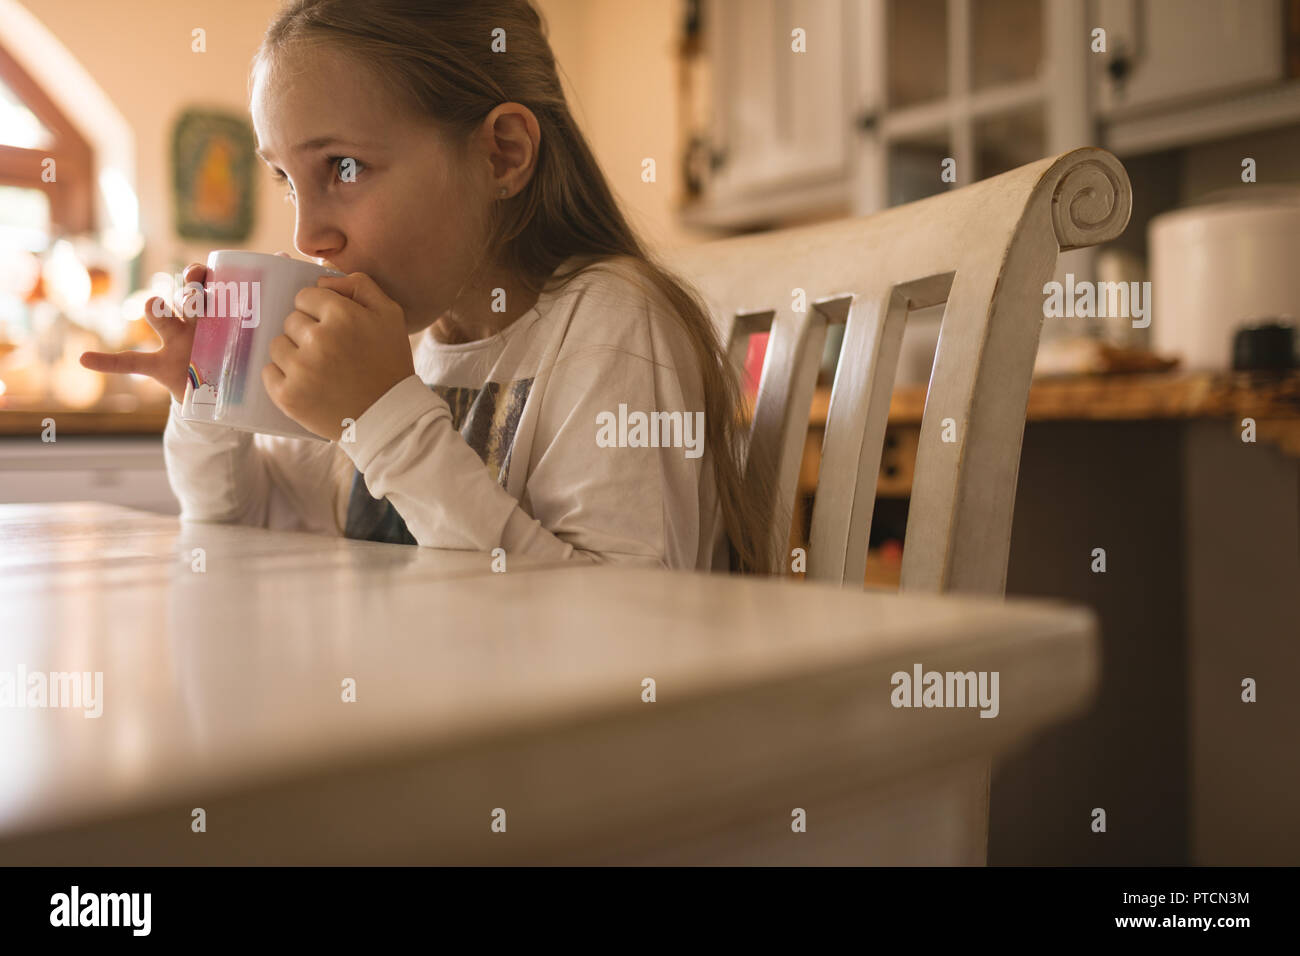 Girl drinking coffee at home Stock Photo